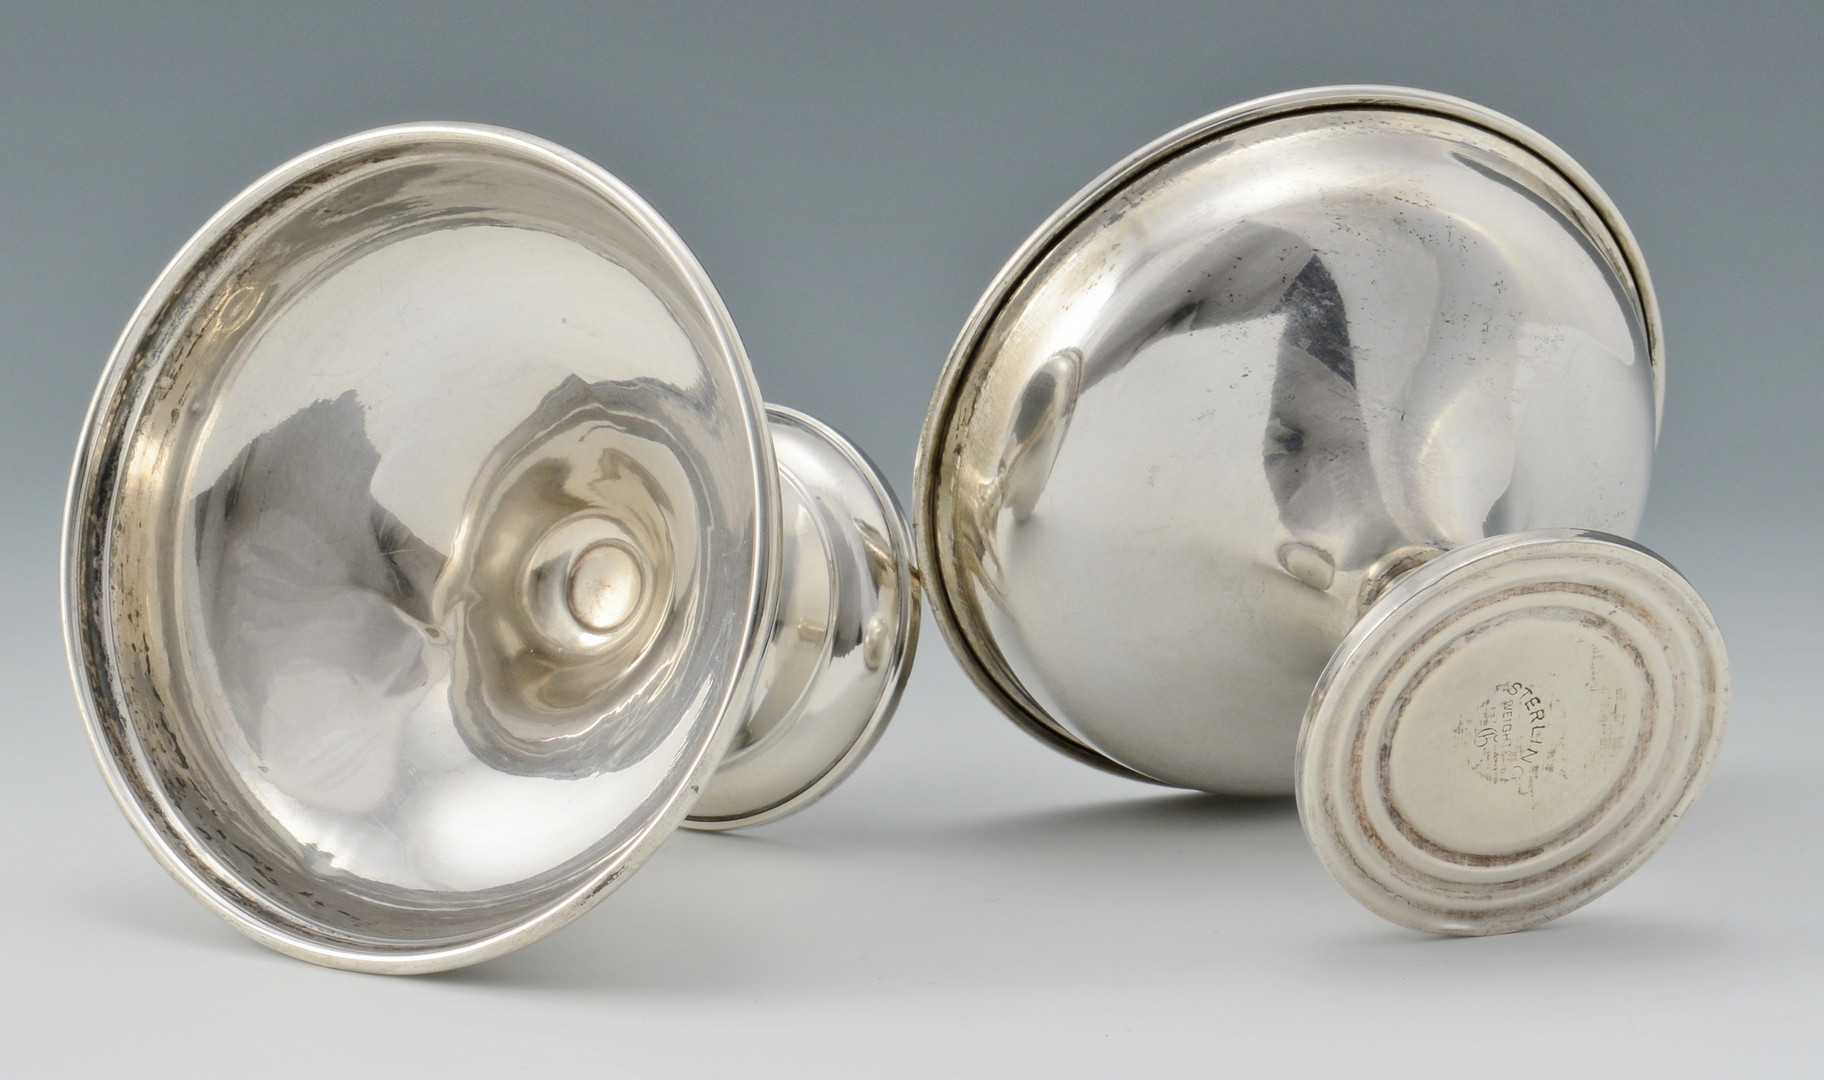 Lot 800: 16 Sterling Weighted Sherbets